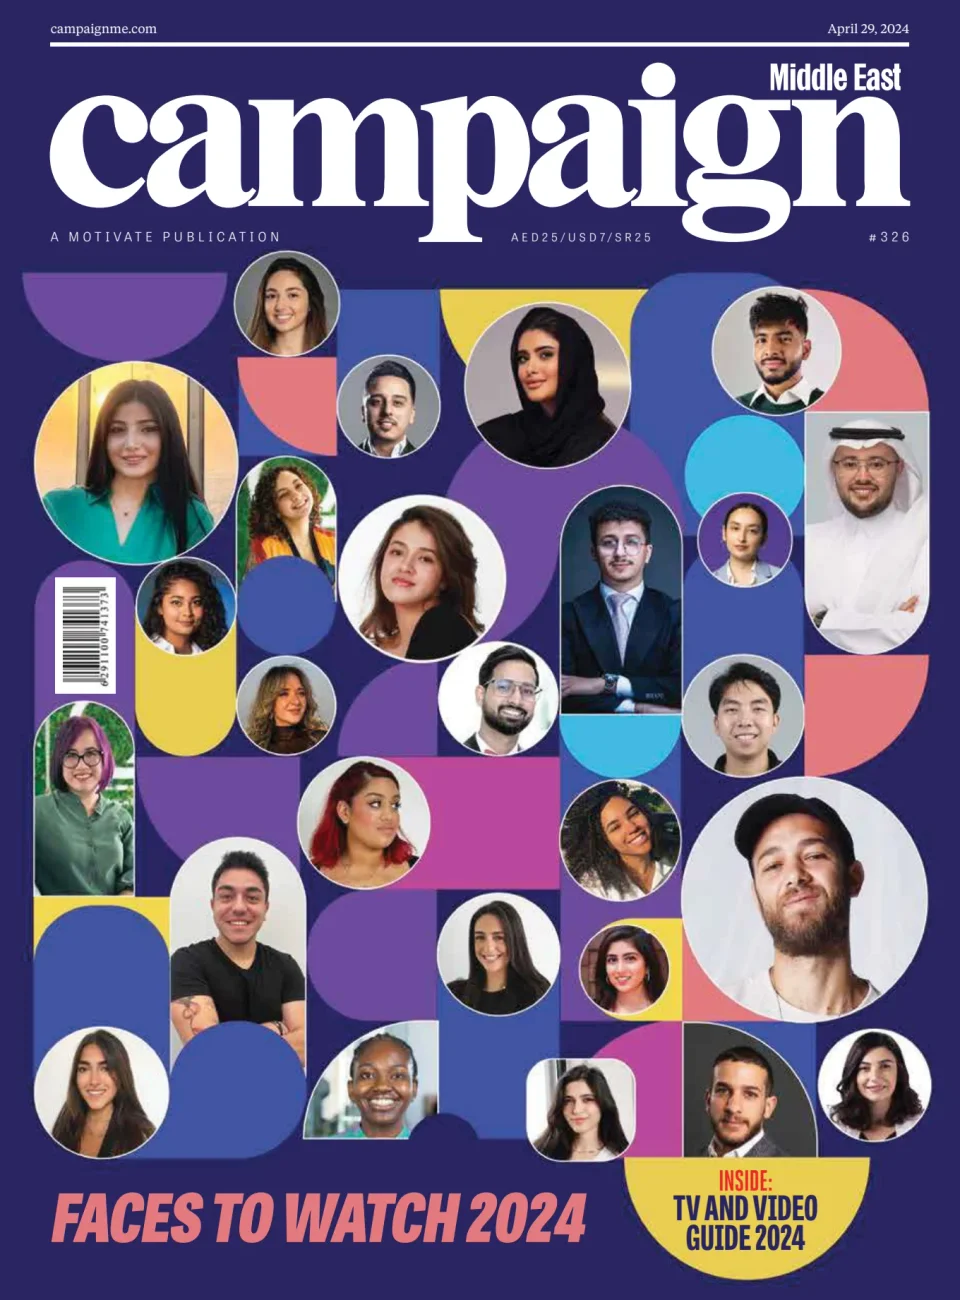 Campaign Middle East